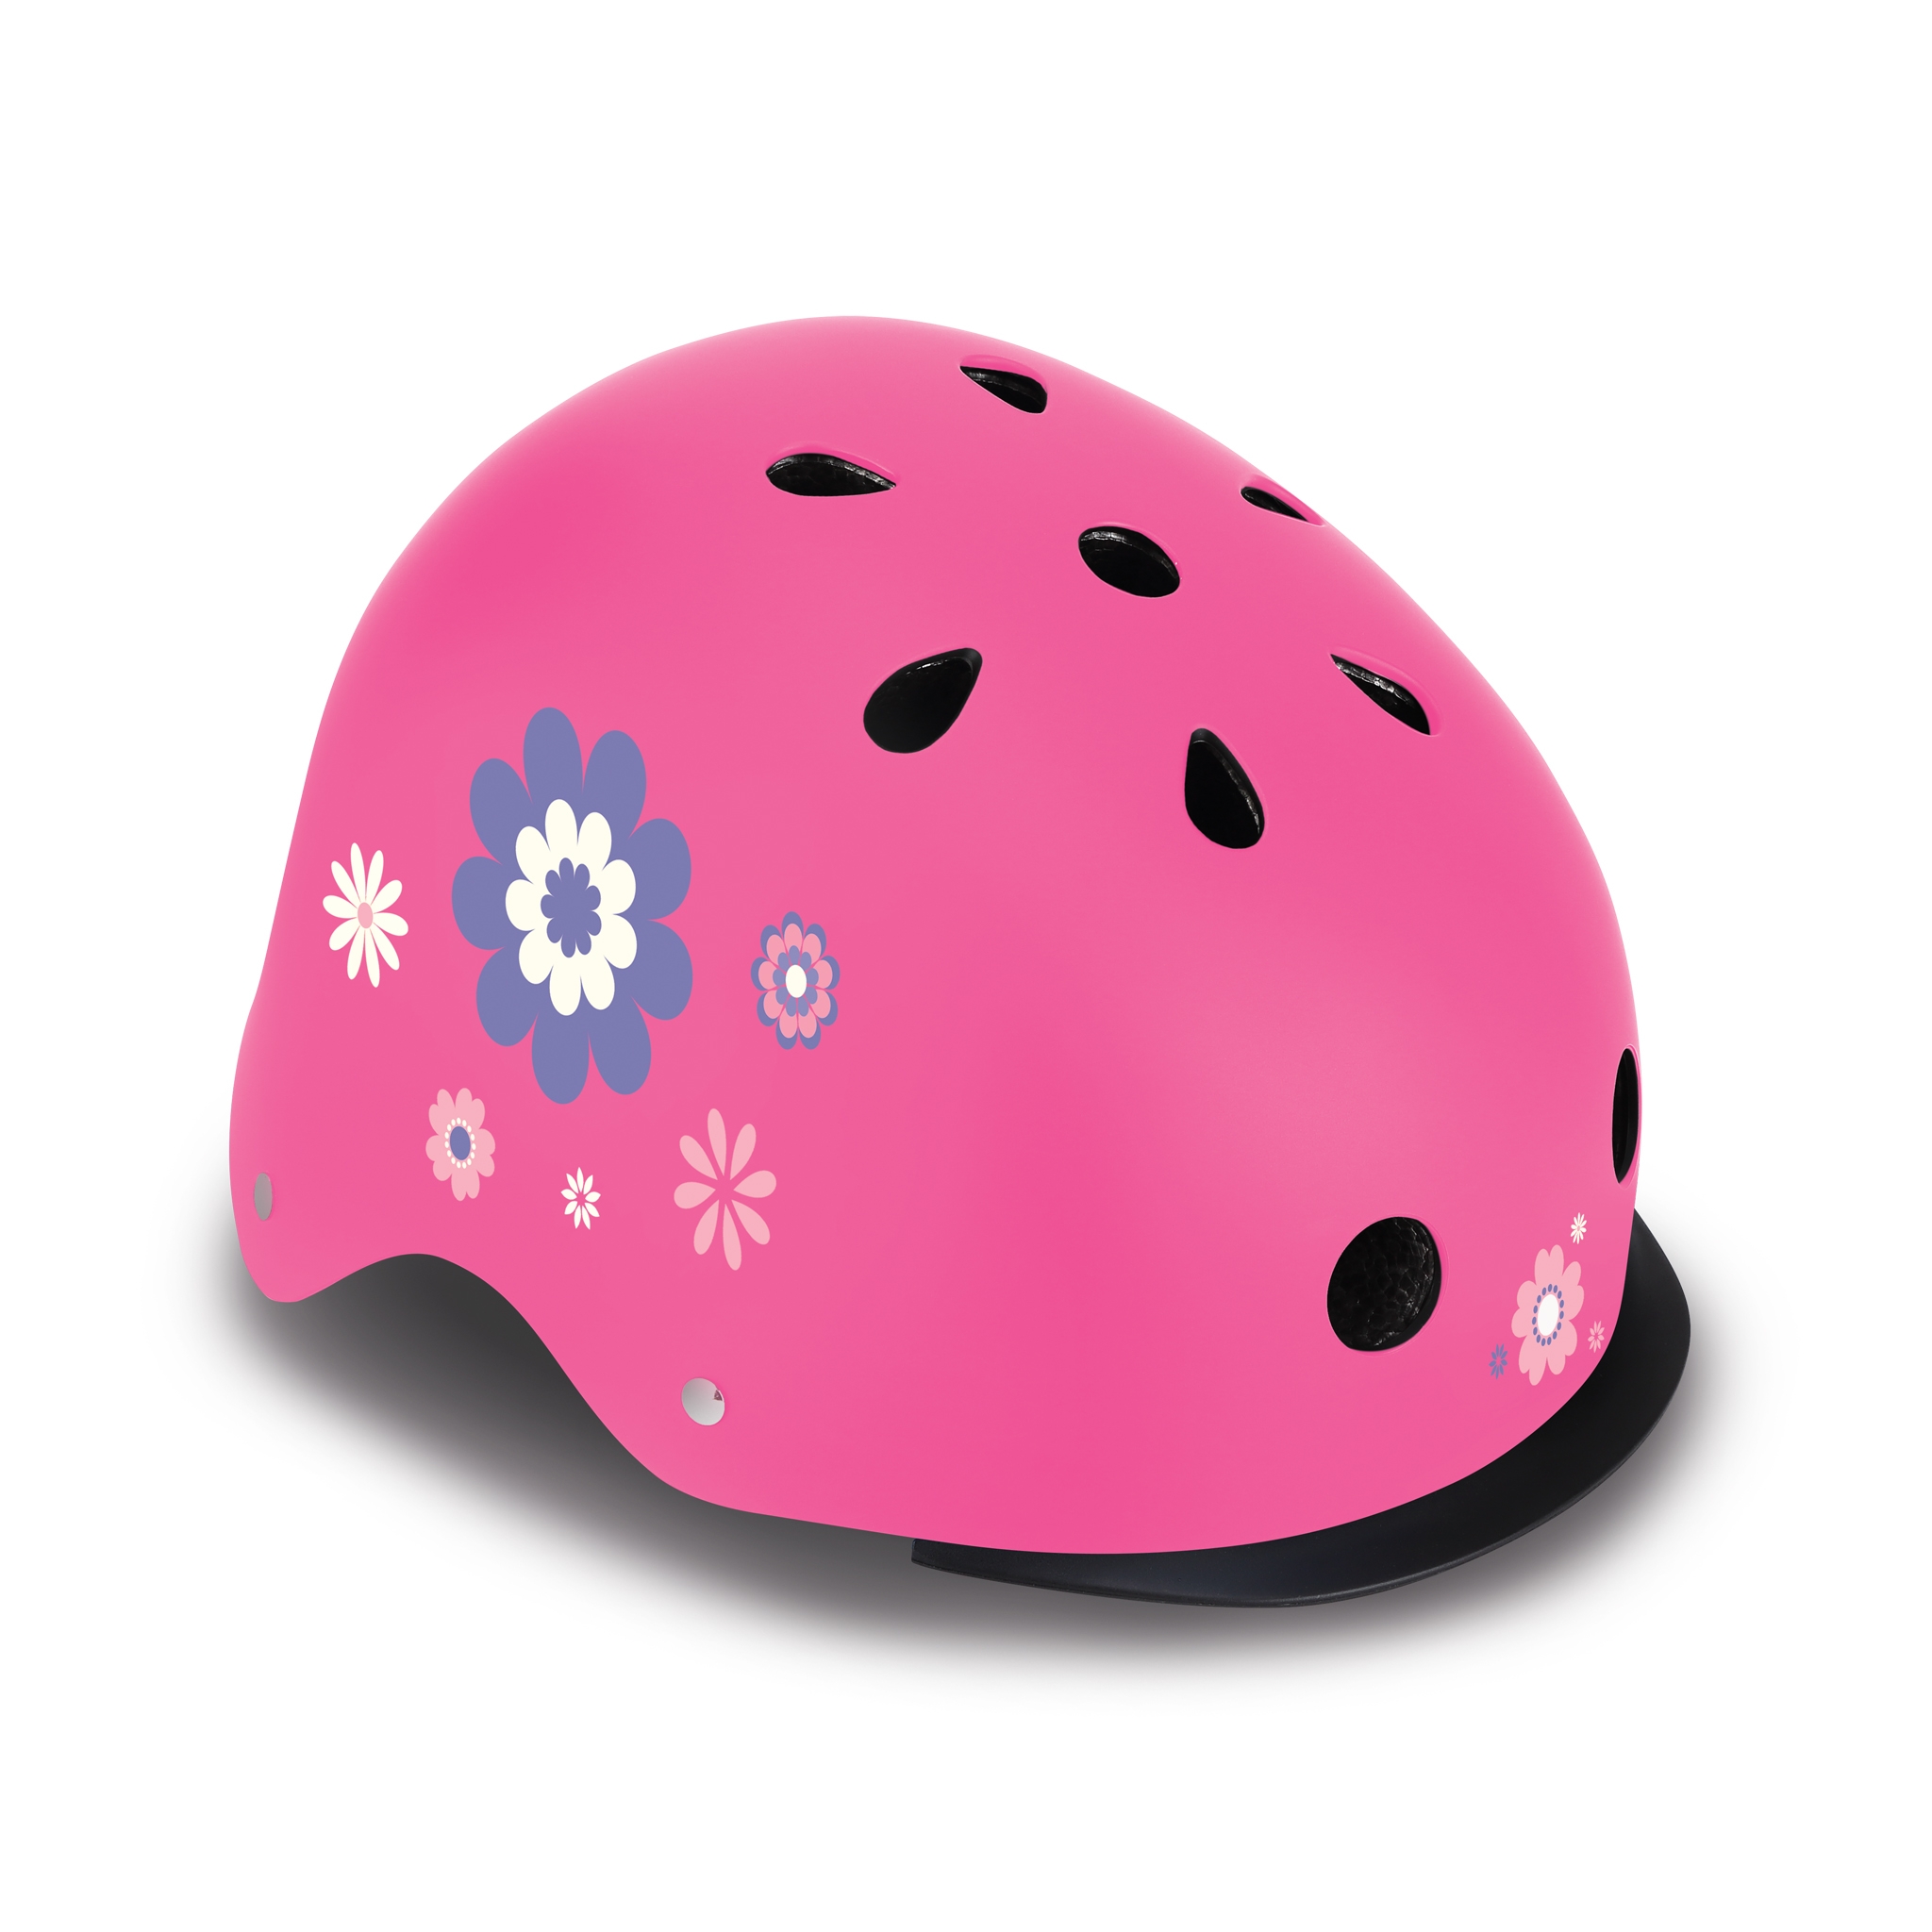 ELITE-helmets-scooter-helmets-for-kids-in-mold-polycarbonate-outer-shell-deep-pink 0